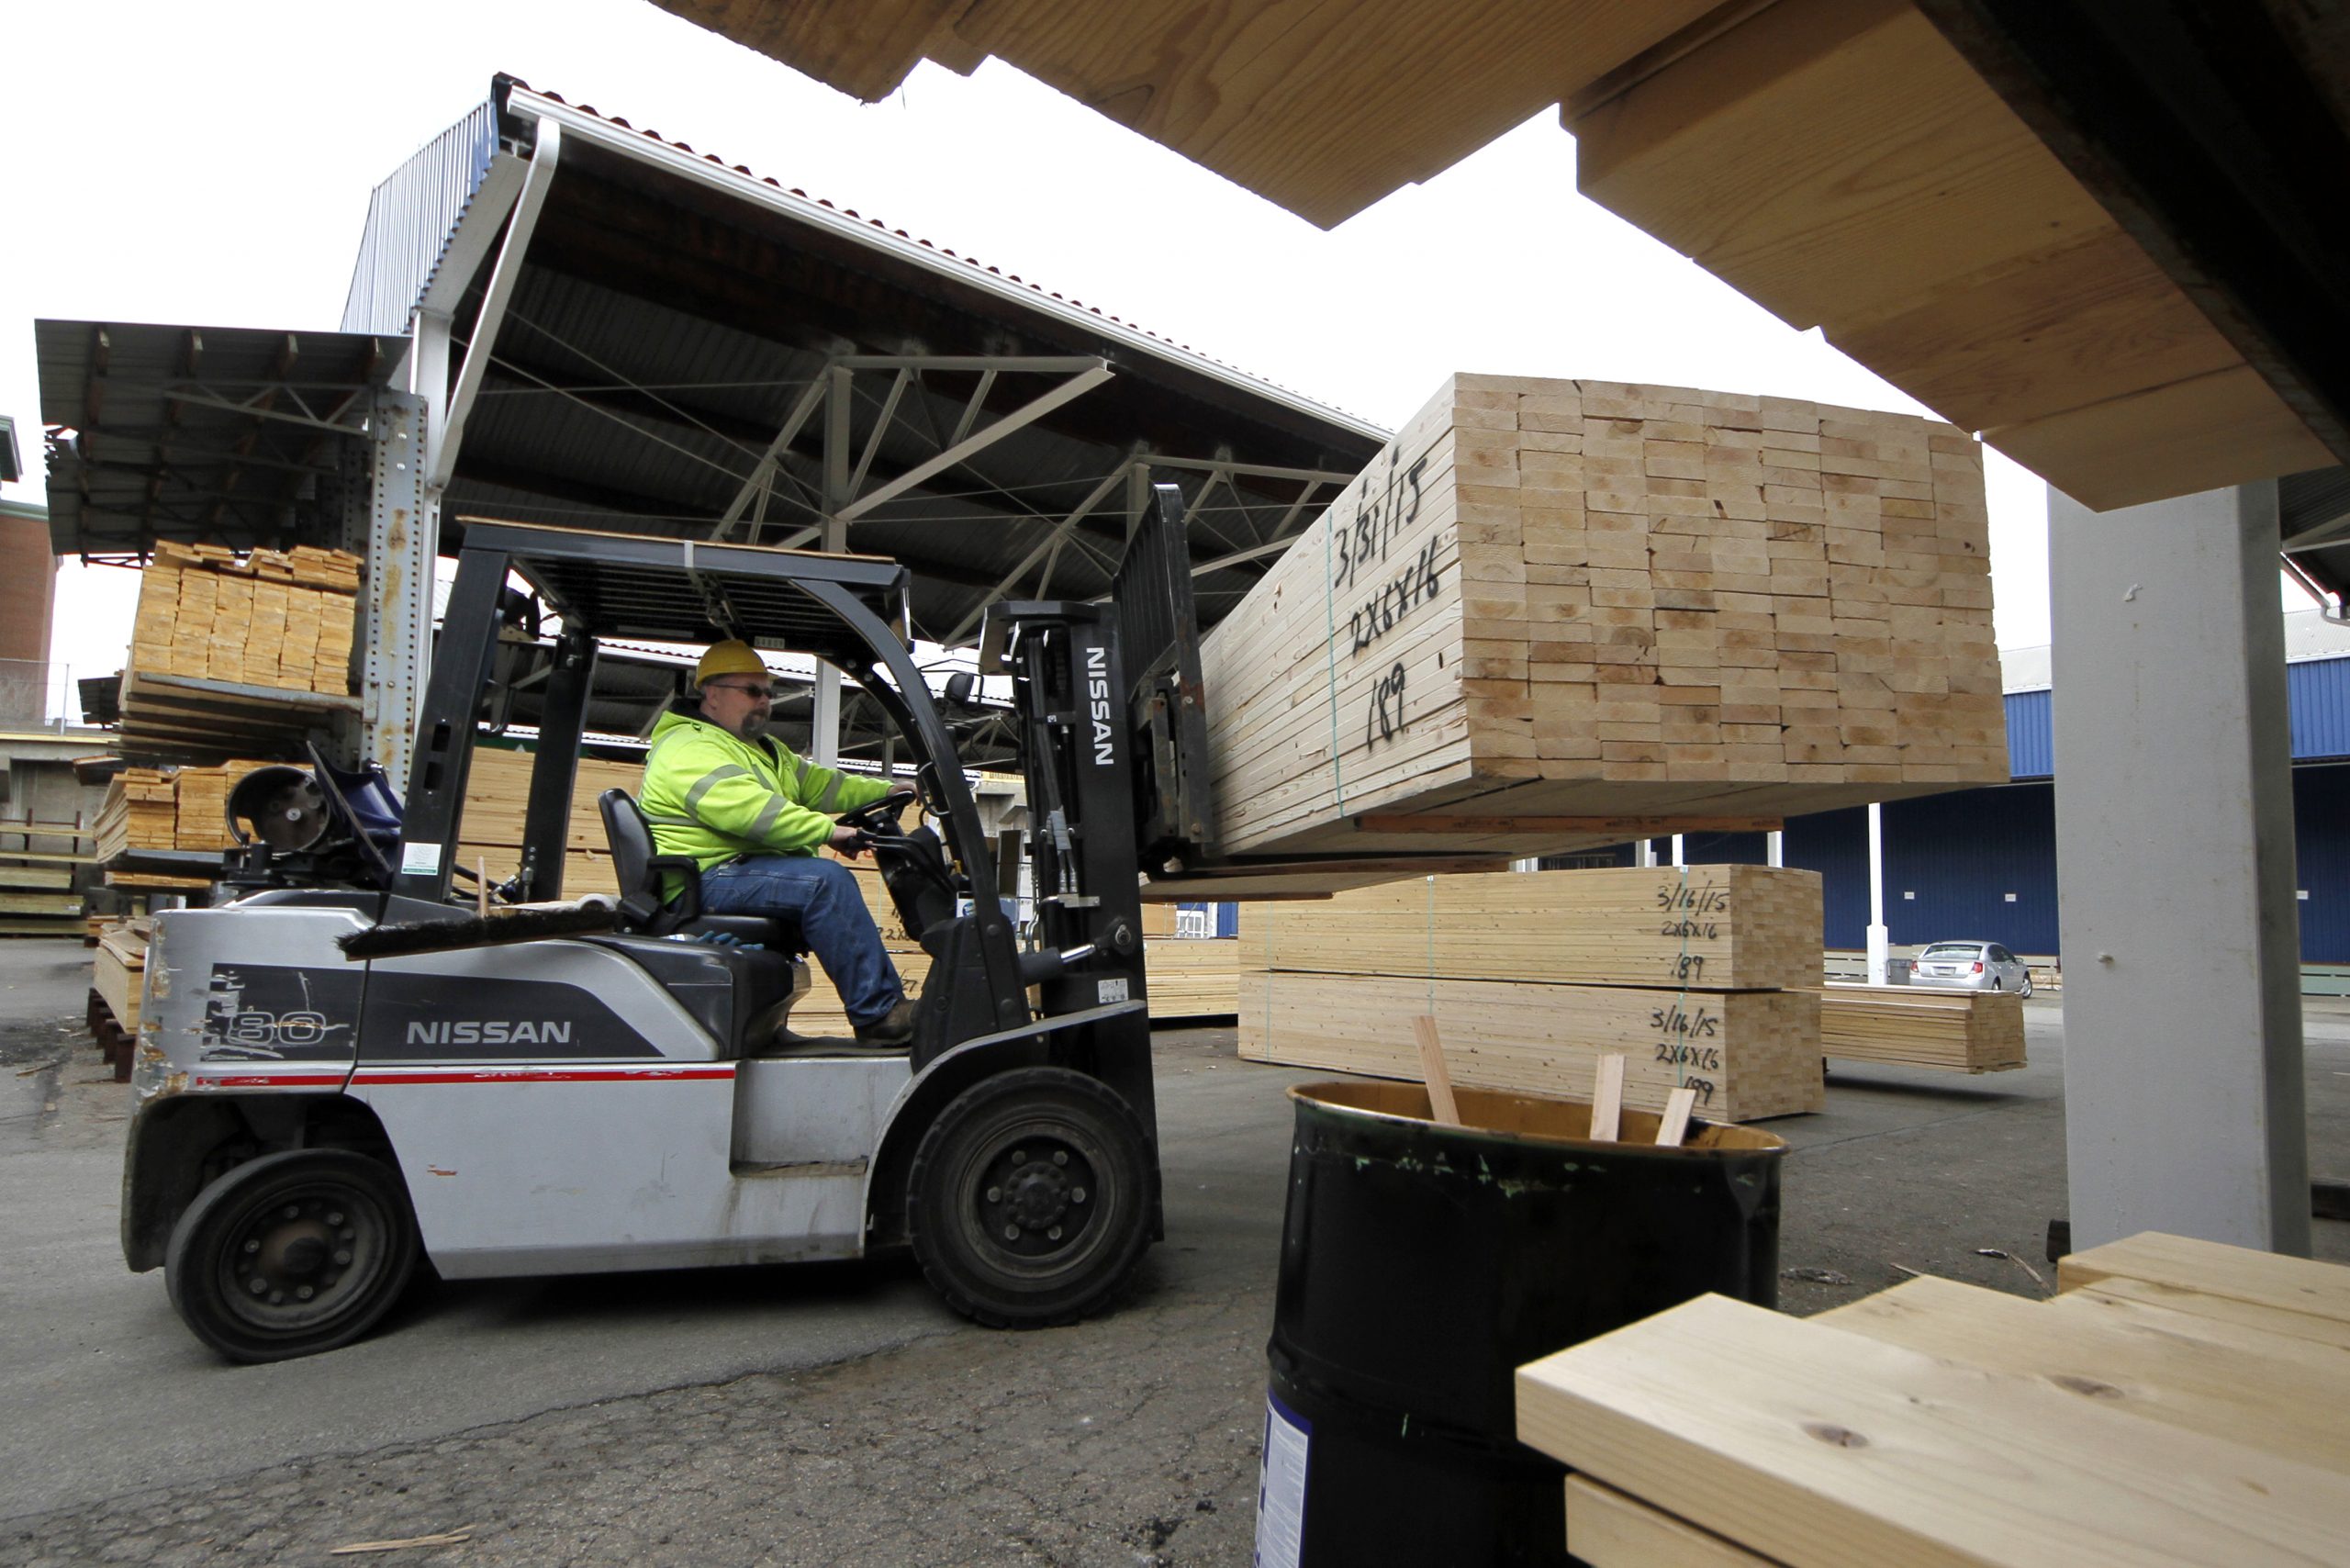 Man in forklift moves 2x4s at lumber yard